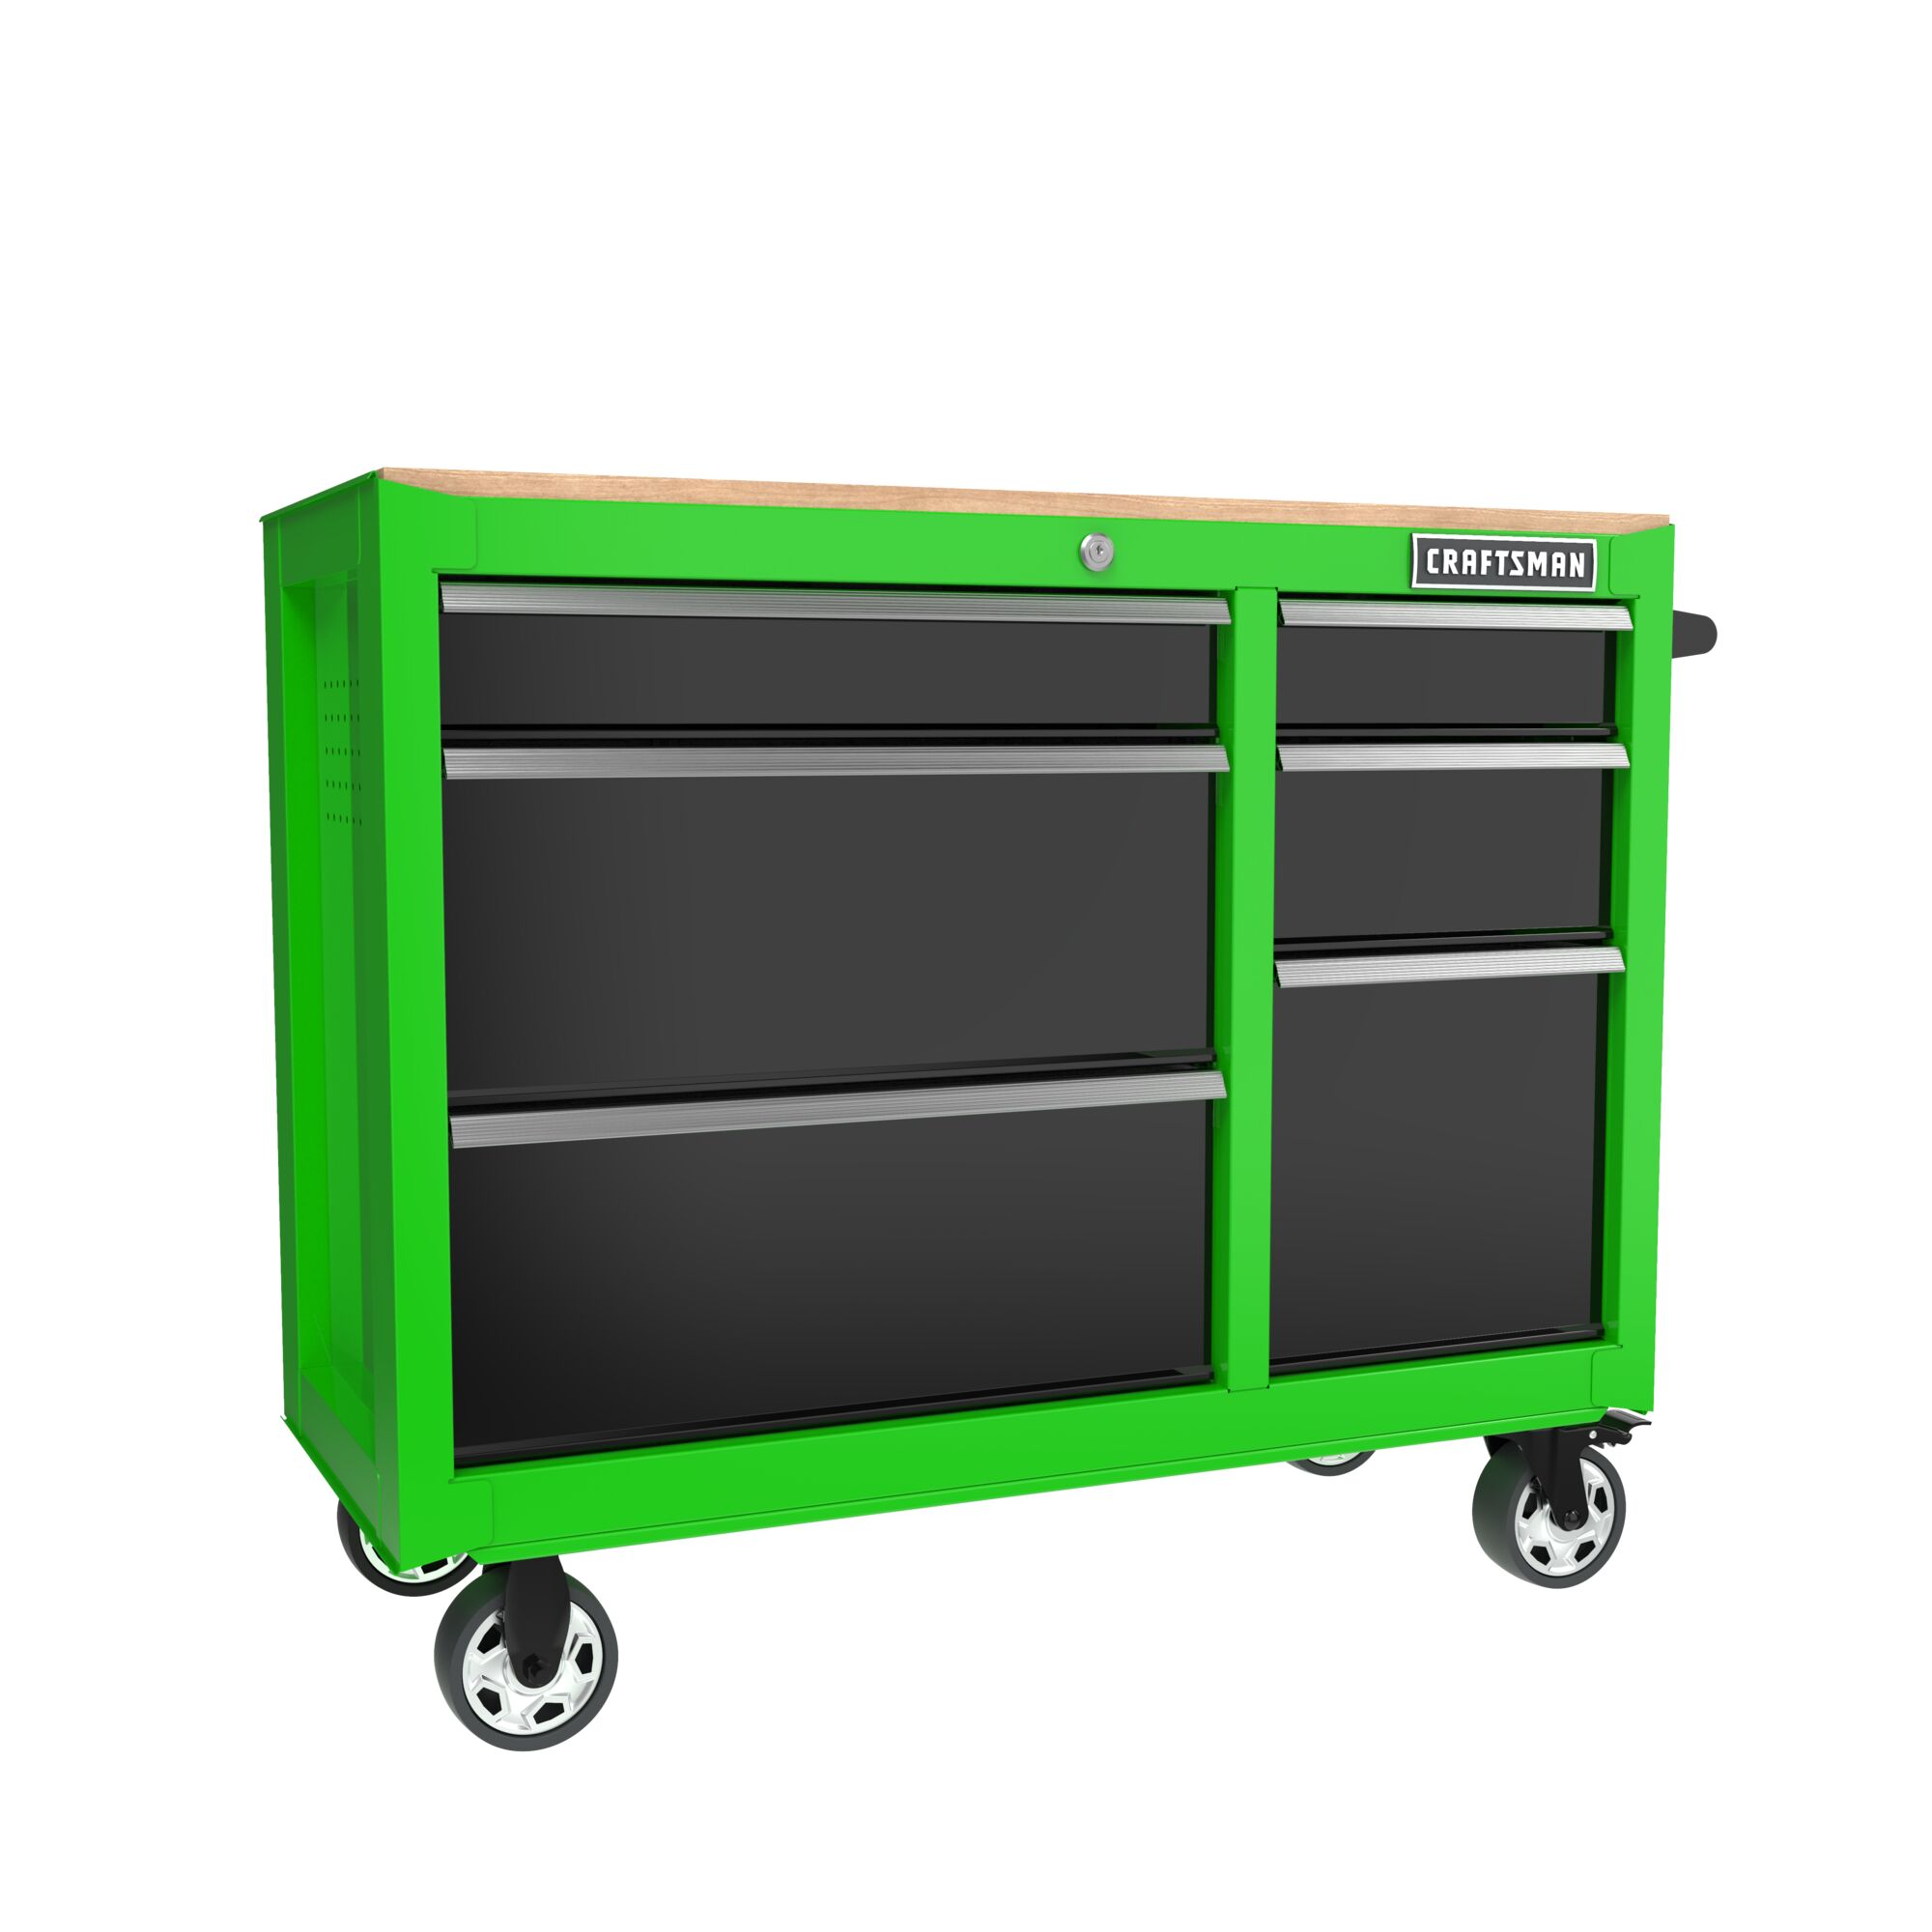 Lime green CRAFTSMAN S2000 Series 41-inch wide 6-drawer workstation with black drawers and wood top, at 3/4 turn to right